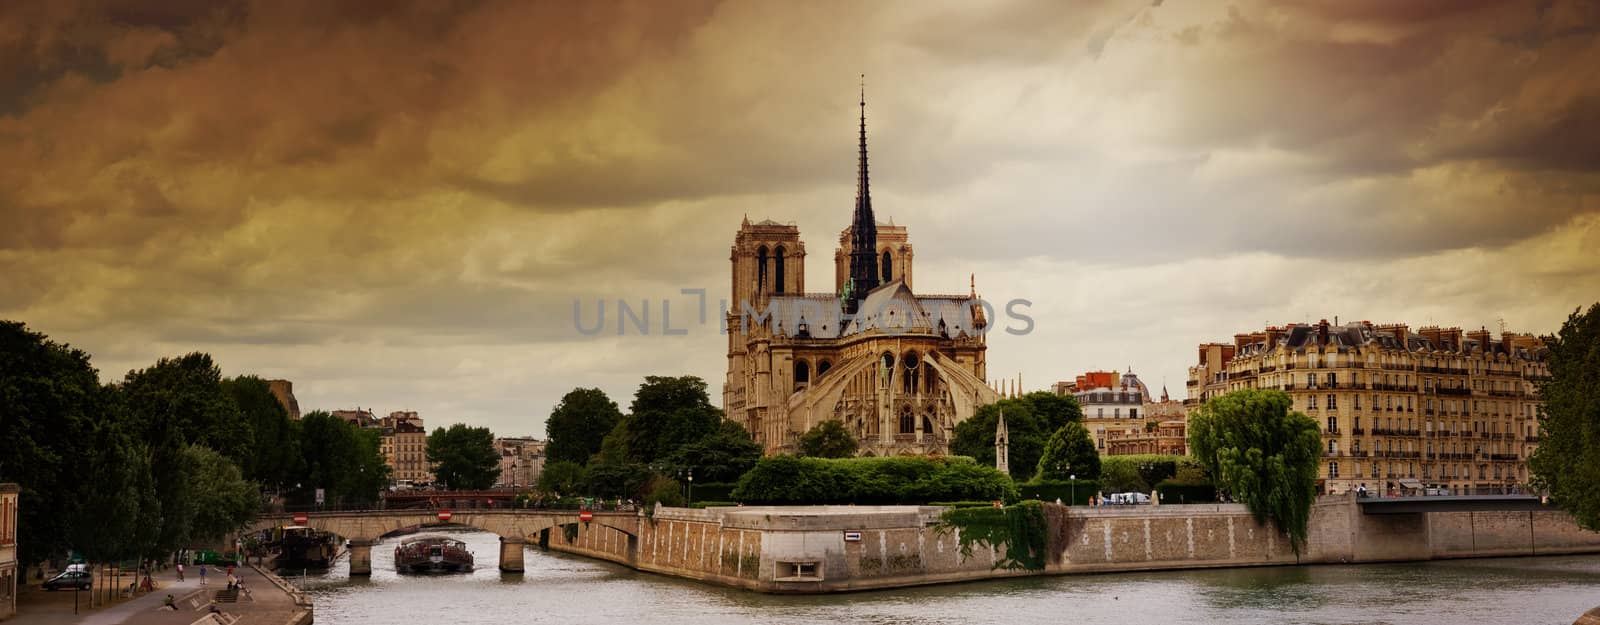 Notre Dame Cathedral In Paris, France by chrisroll